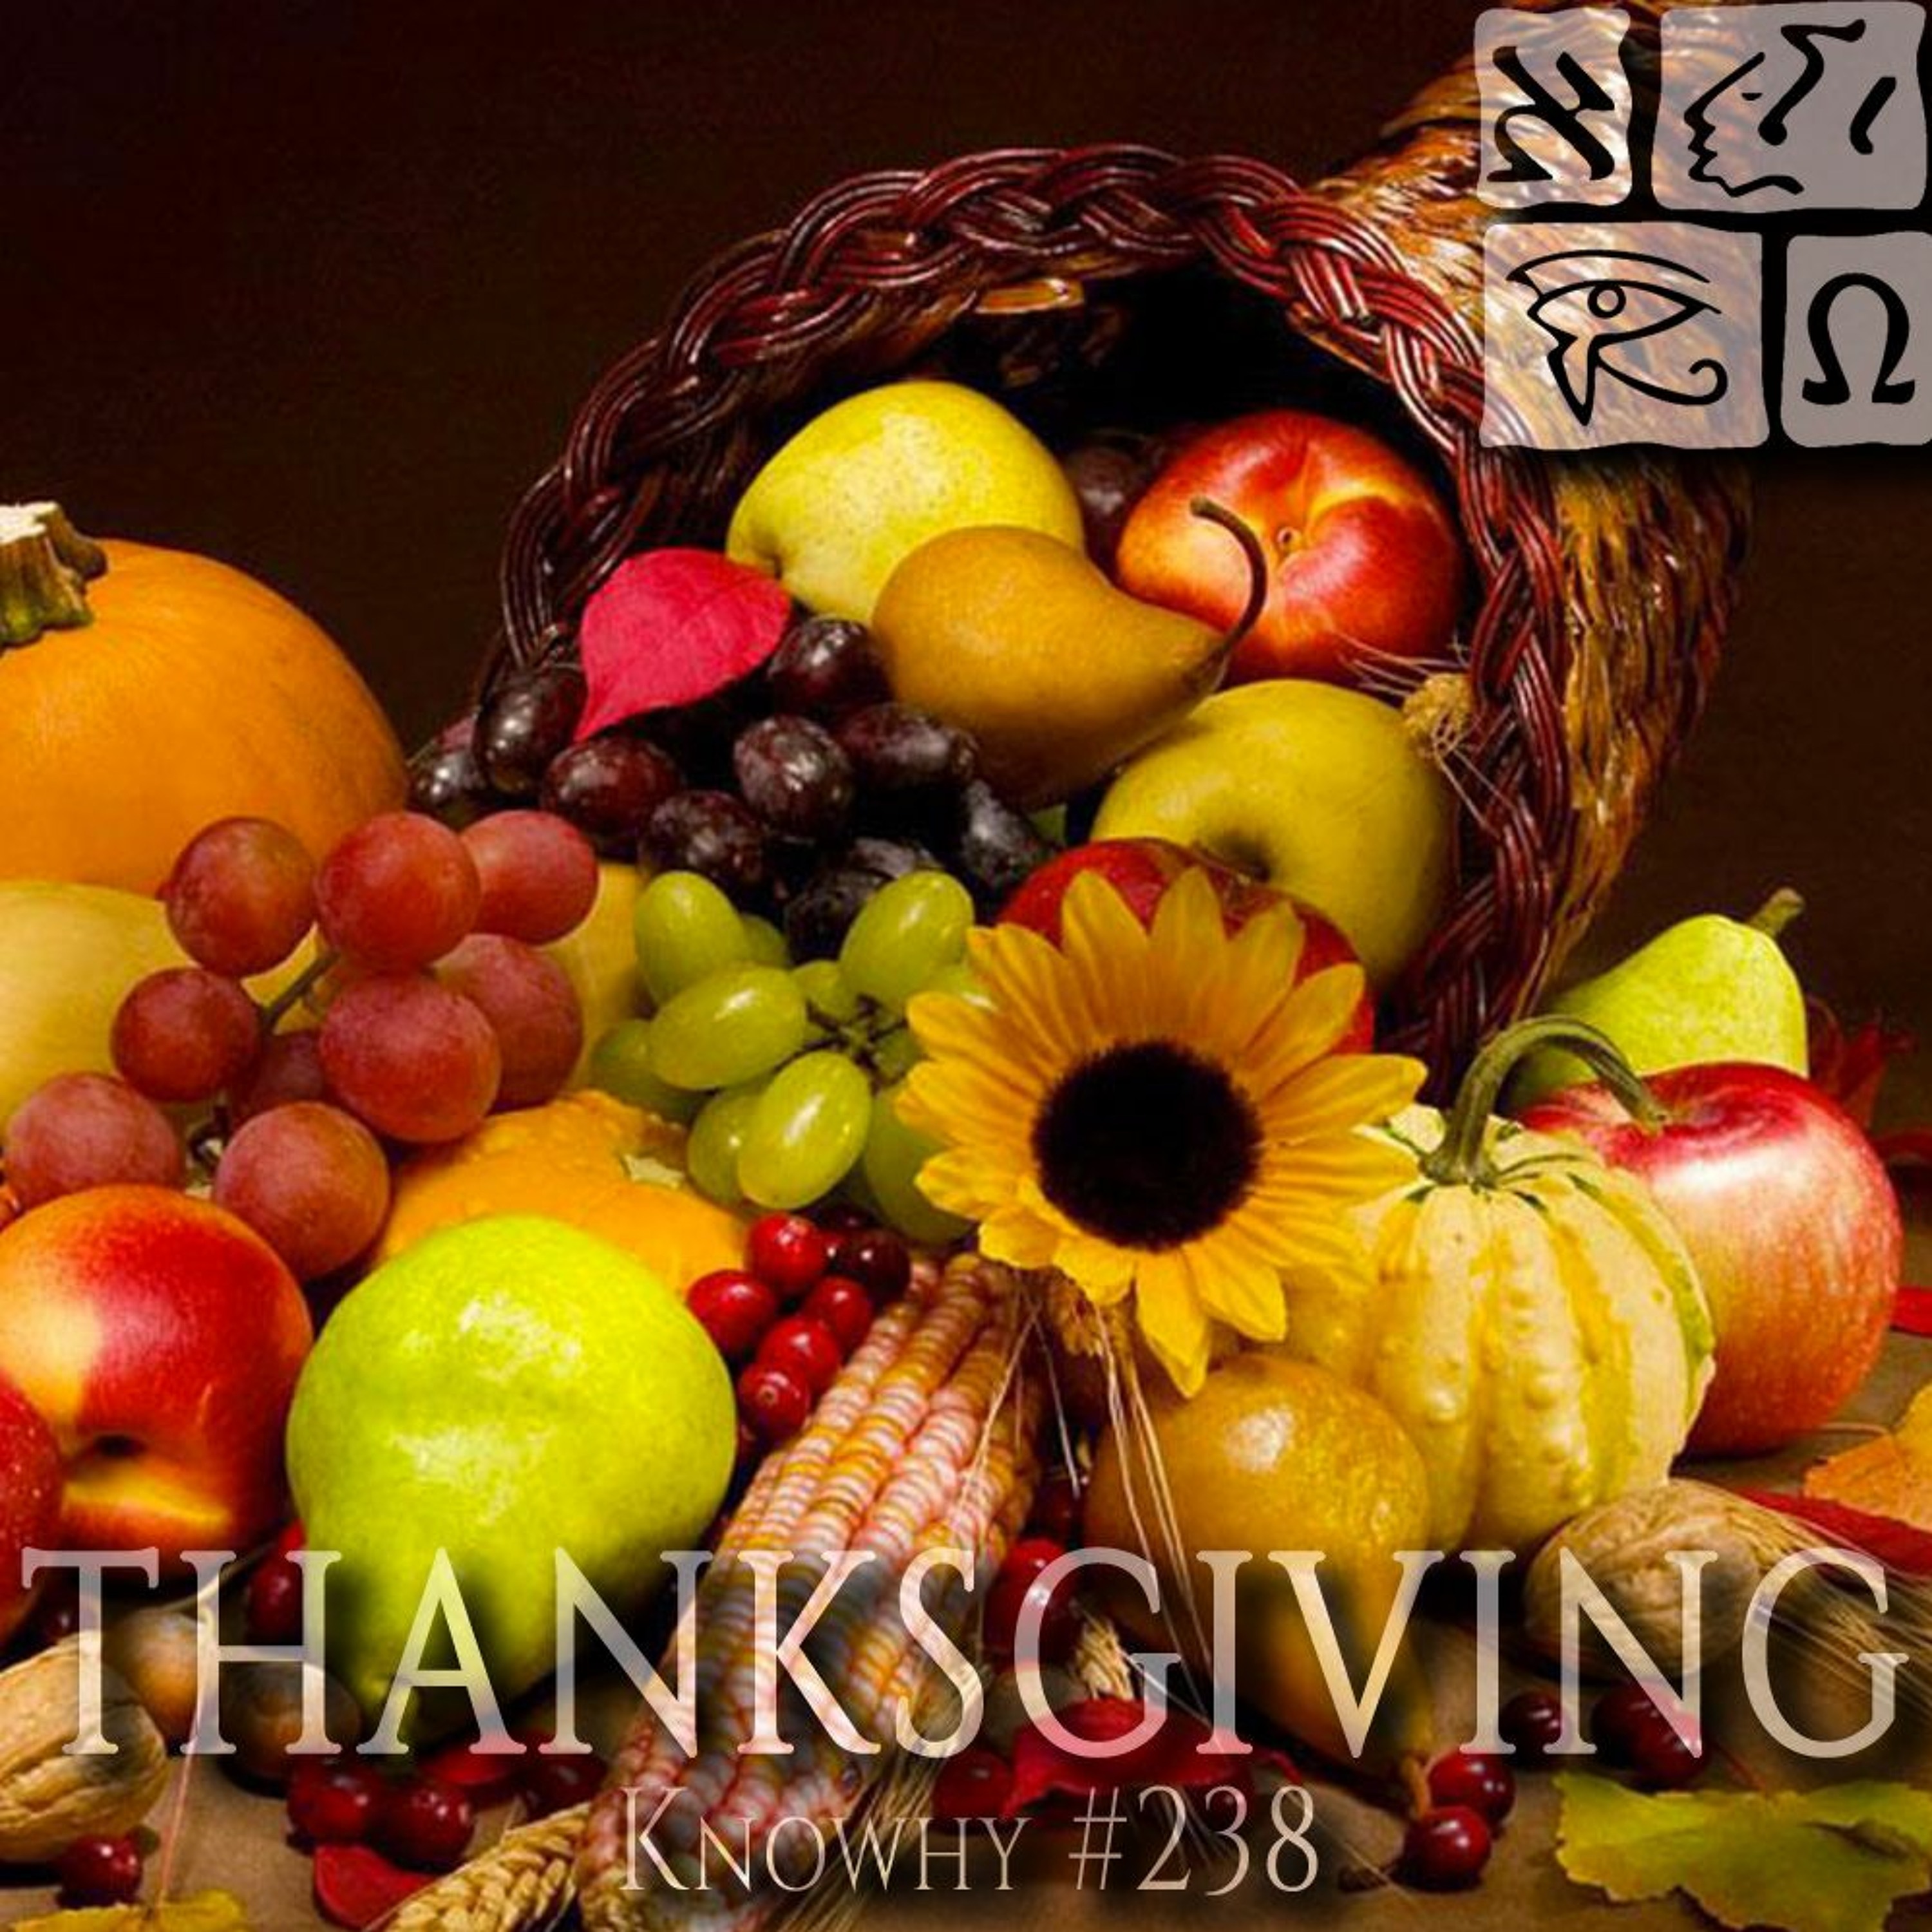 Why Should We Take The Time To Give Thanks To God? #238